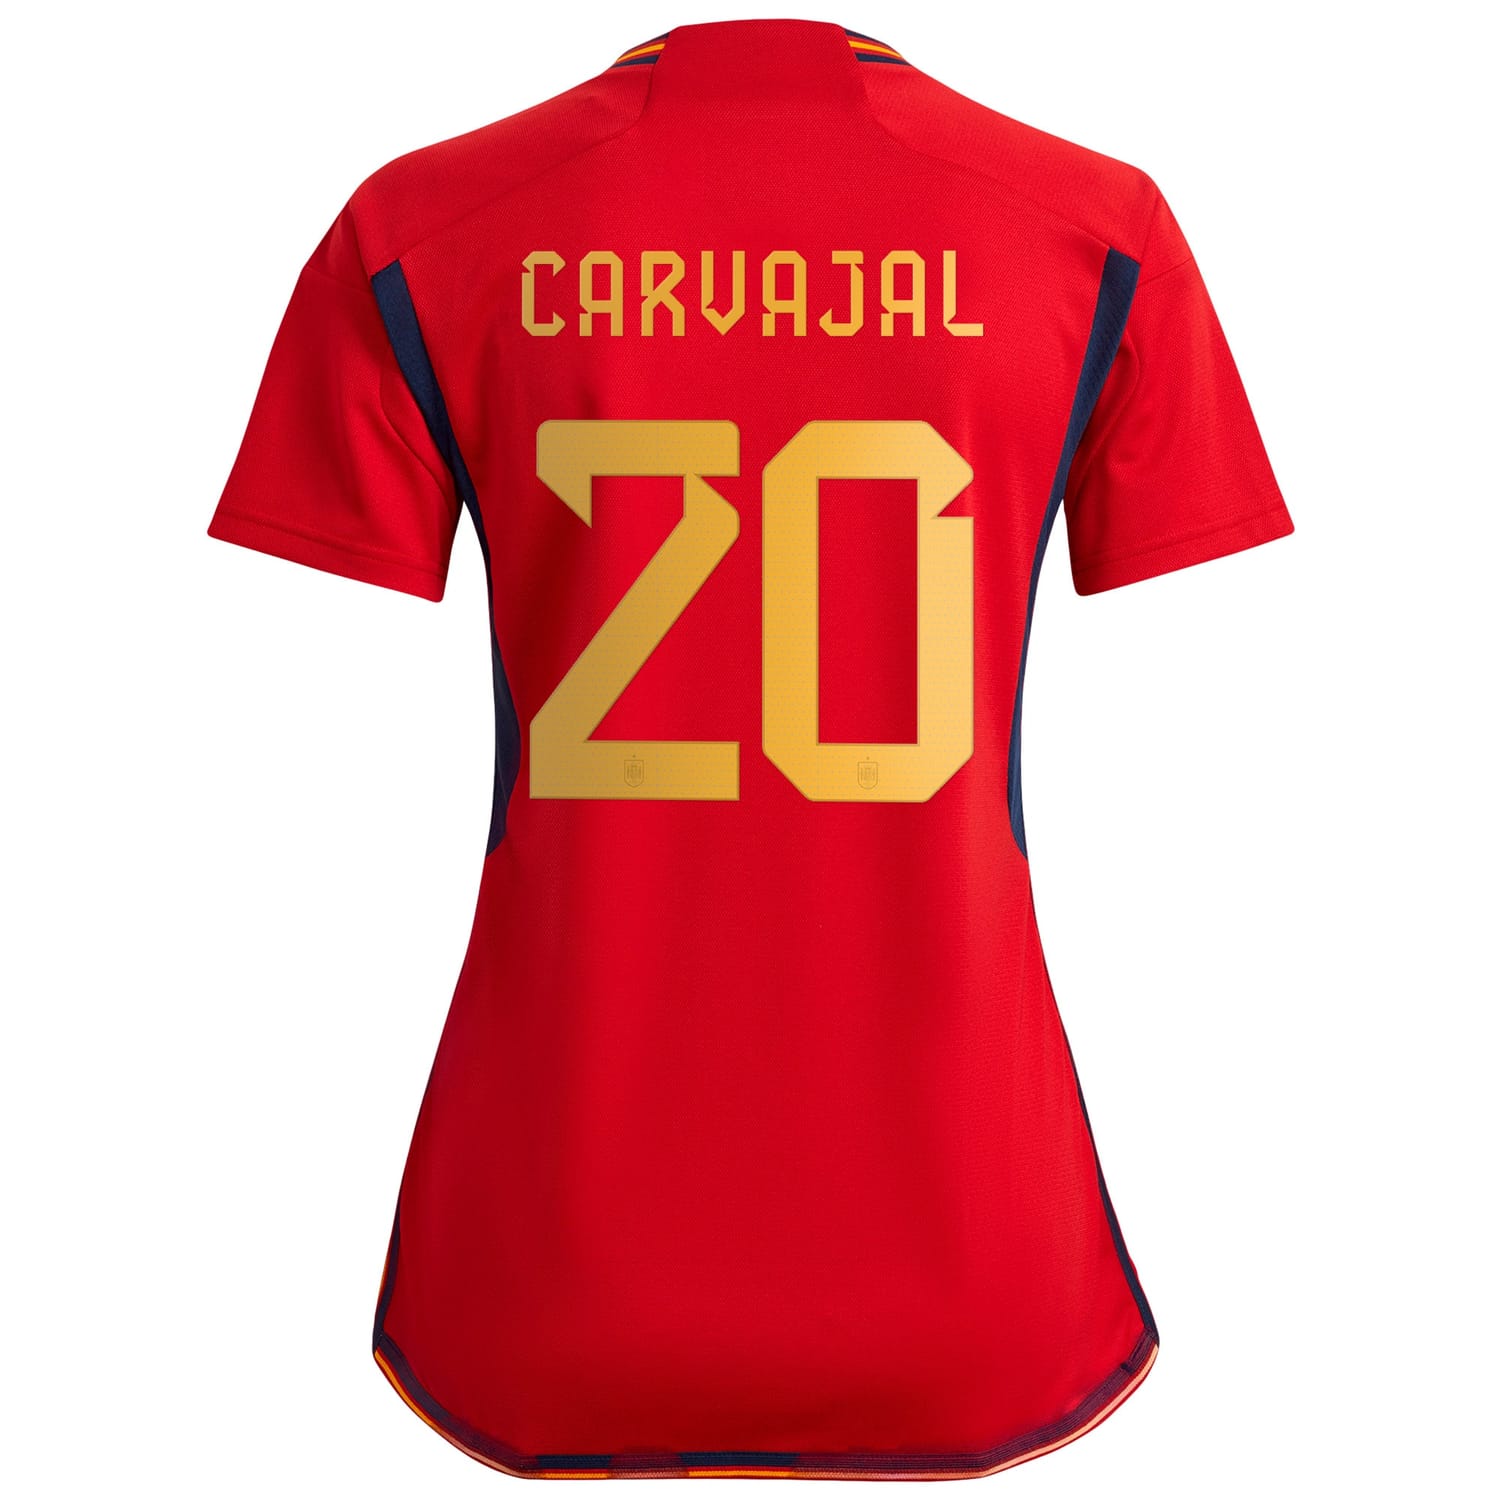 Spain National Team Home Jersey Shirt Red 2022-23 player Daniel Carvajal printing for Women